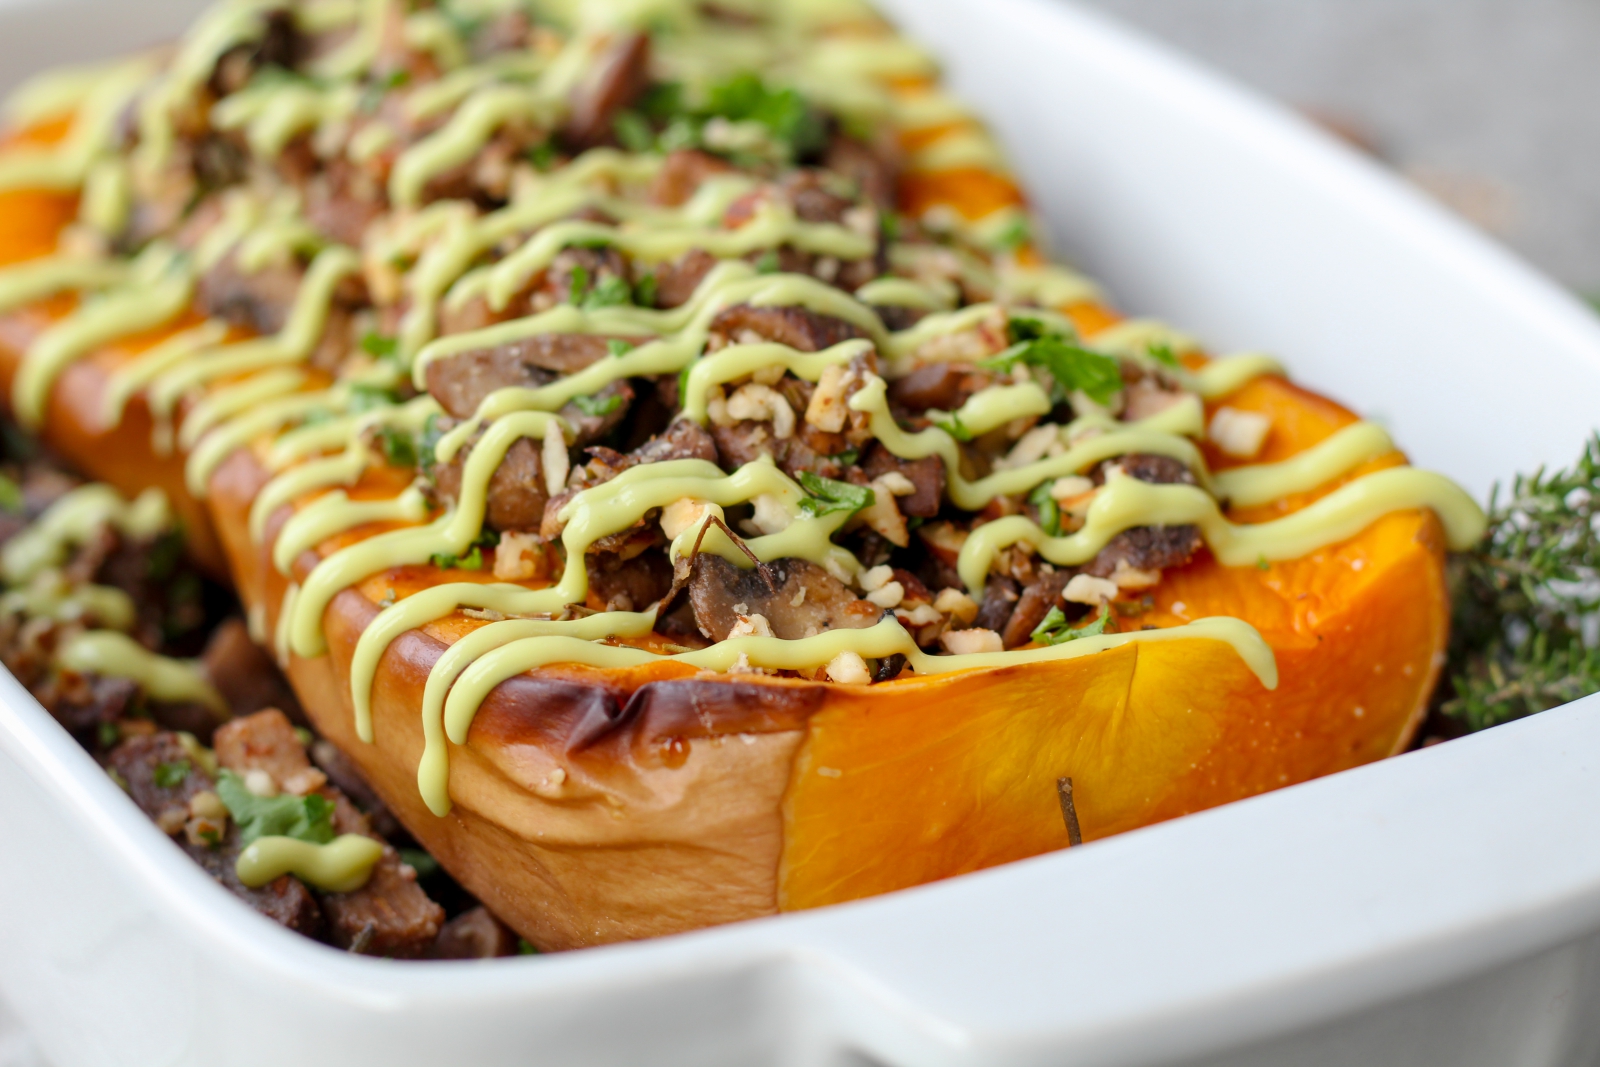 Roasted butternut squash with mushroom stuffing (higher carb)